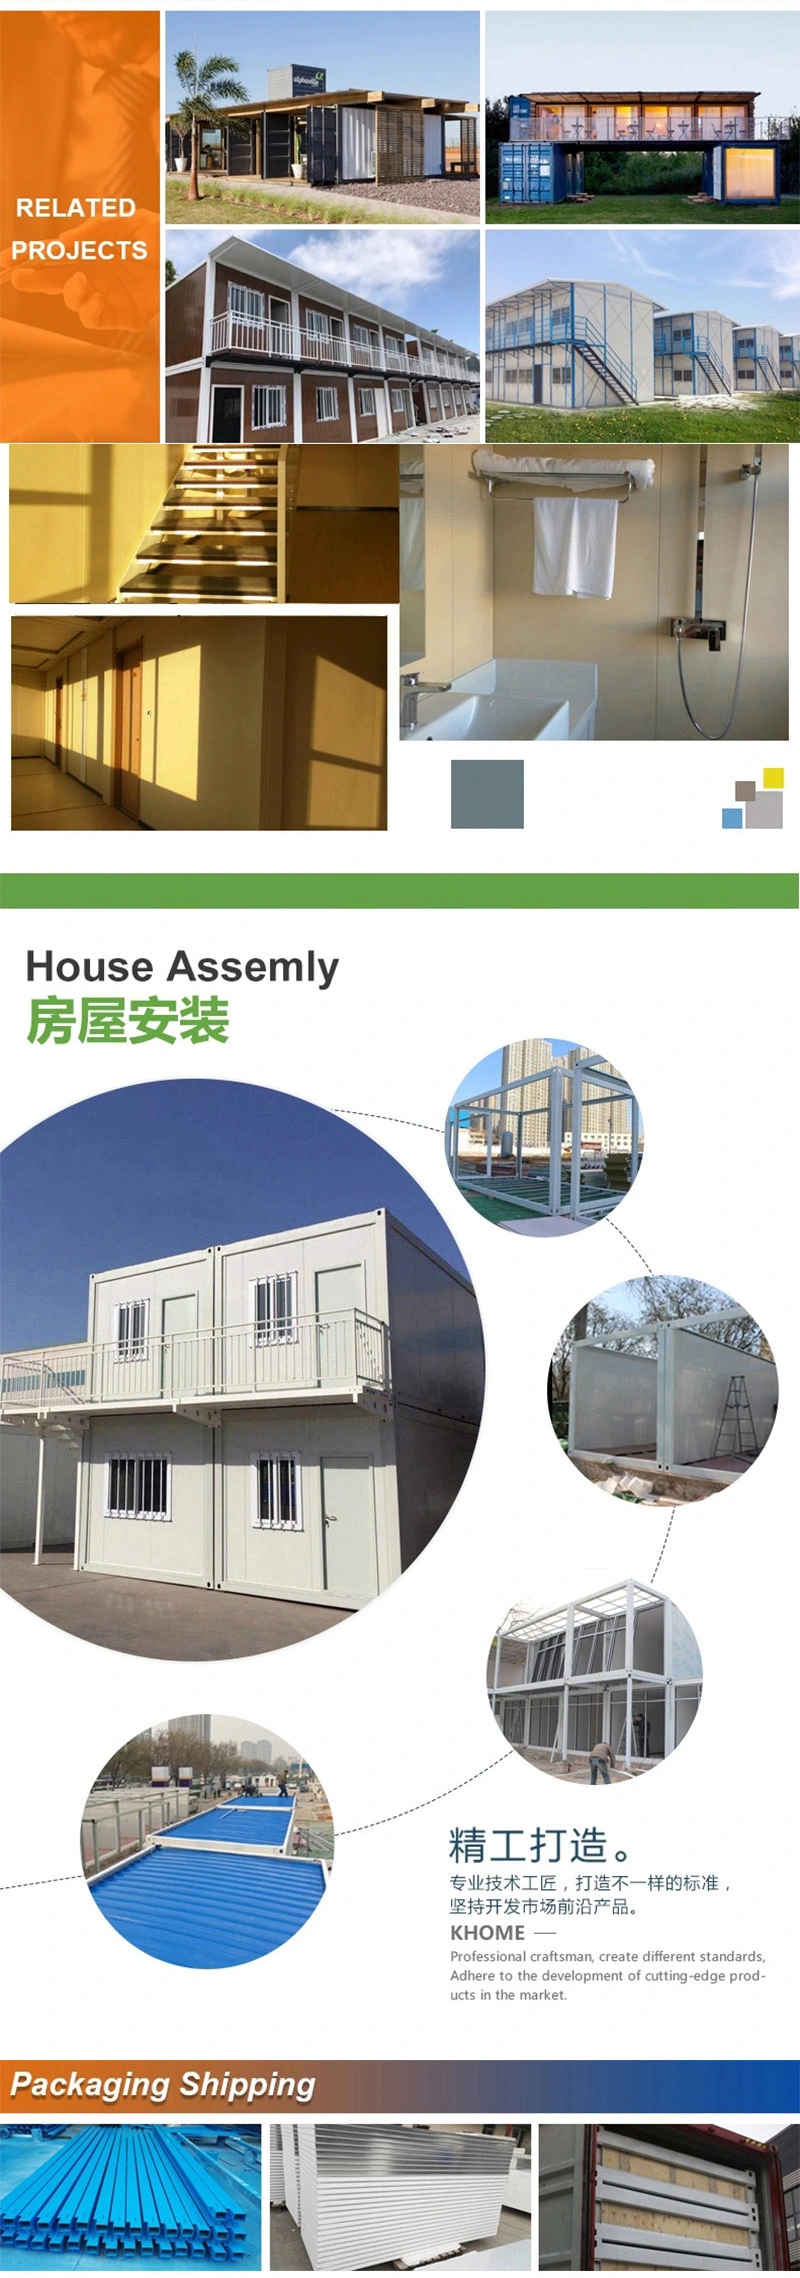 prefabricated portable container house,prefabricated mobile container house,prefabricated house container house,prefabricated container house suppliers,prefabricated steel container house